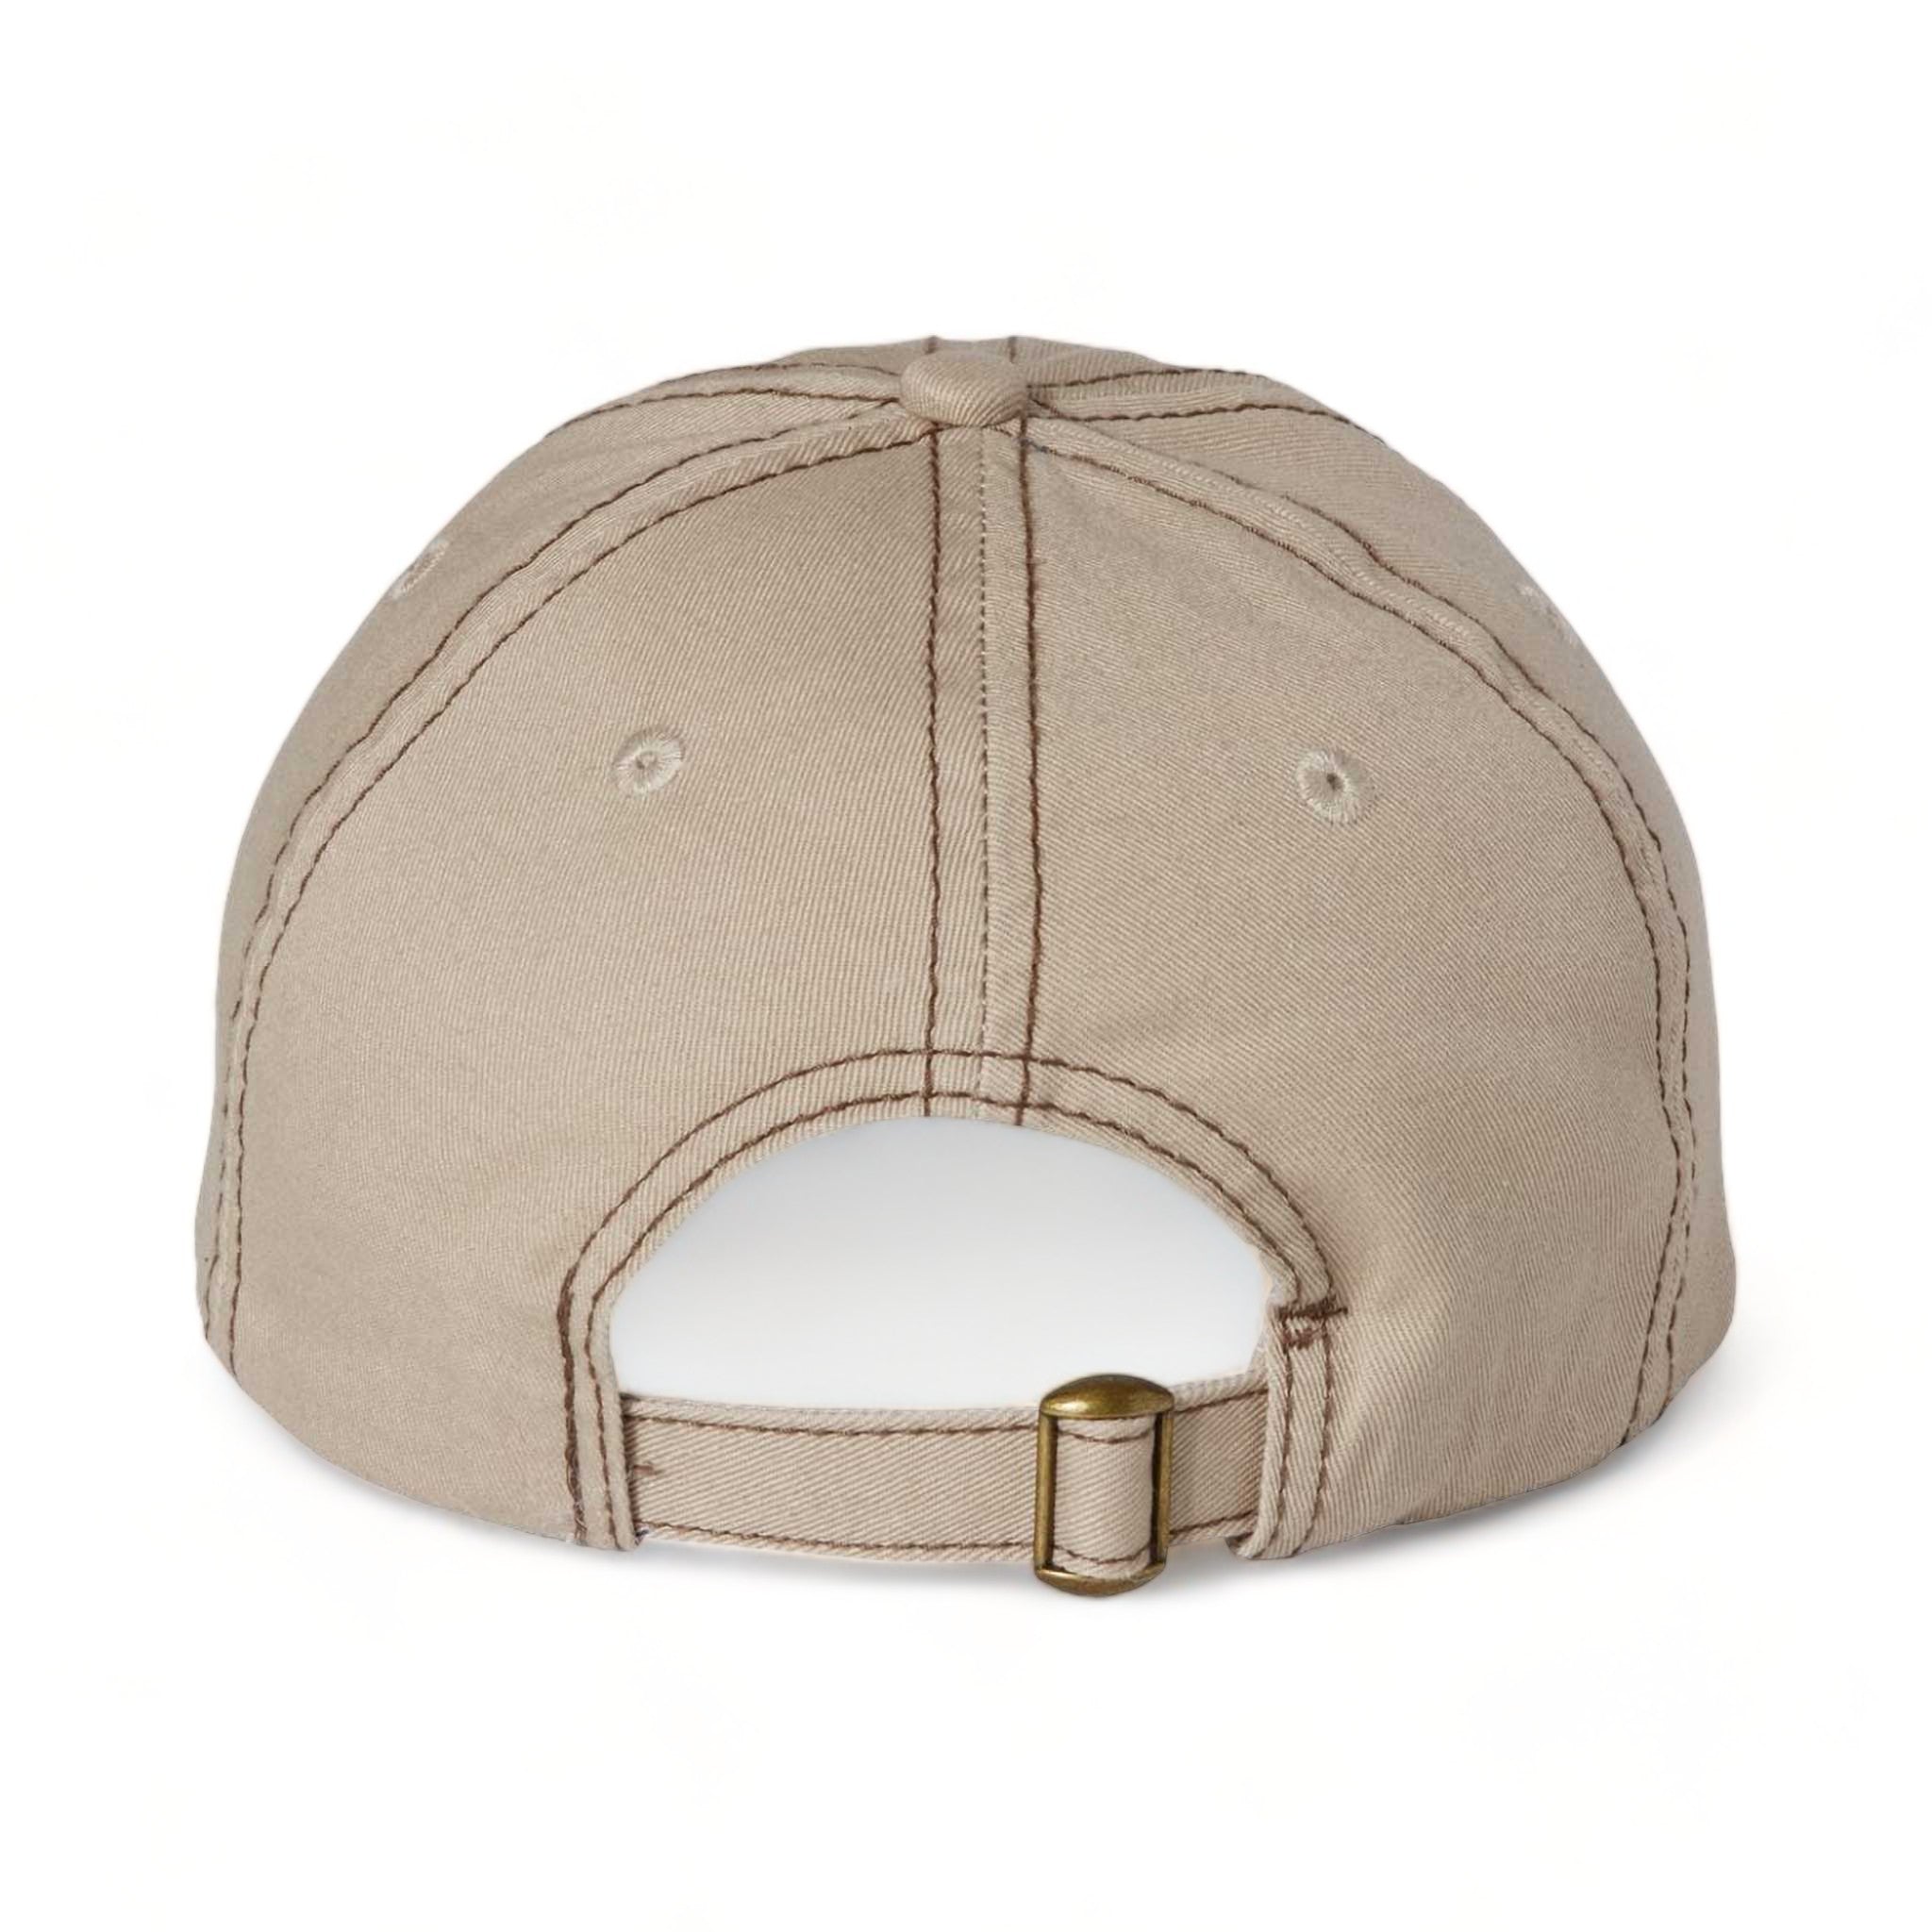 Back view of Valucap VC300A custom hat in khaki and brown stitch